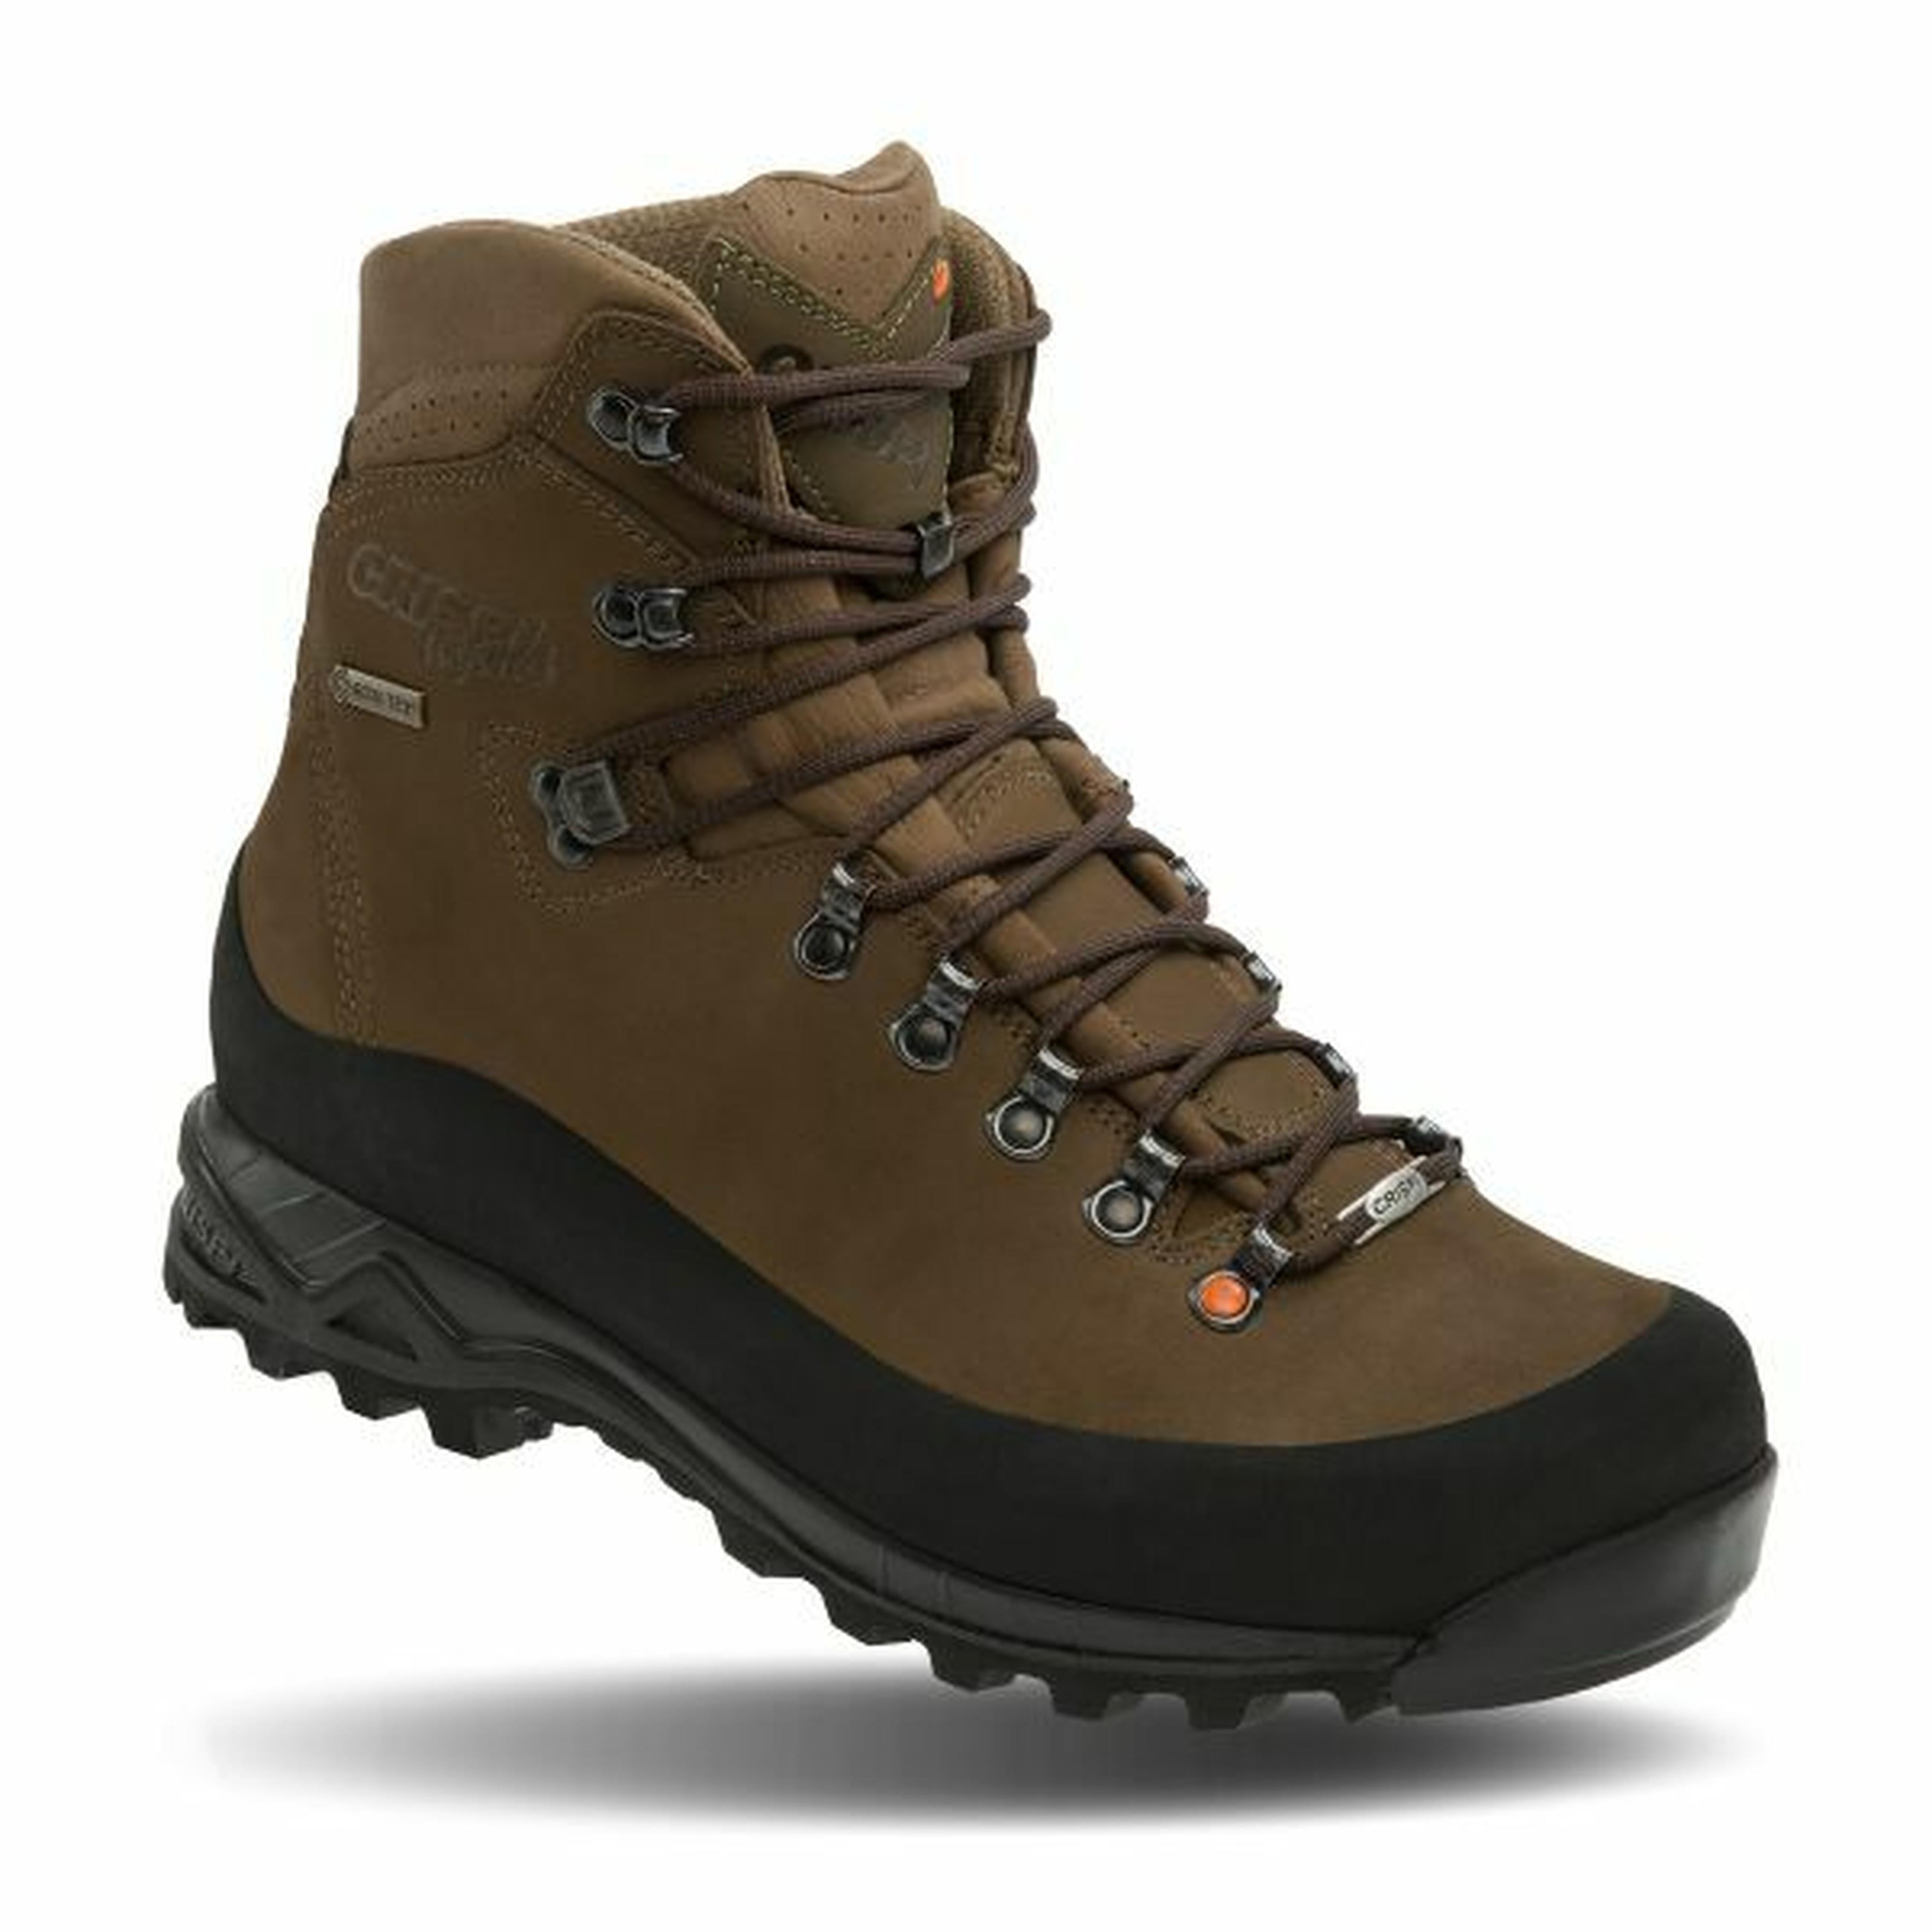 Crispi NEVADA GTX Non-Insulated Hunting Boots IN Store Only